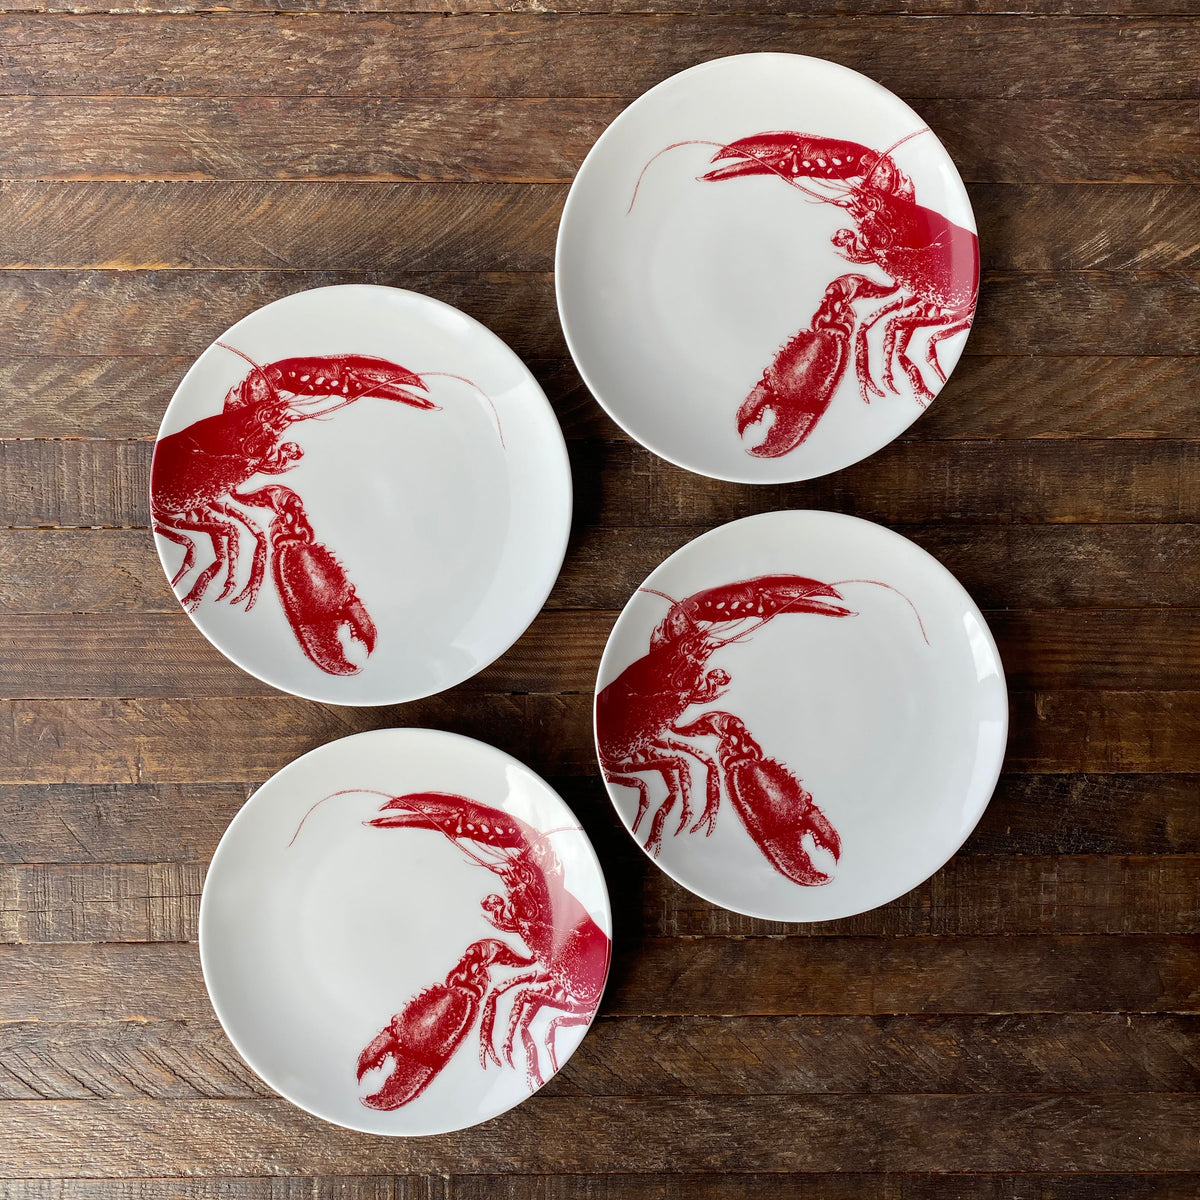 Four **Lobster Red Small Plates** by **Caskata Artisanal Home** arranged on a wooden surface, showcasing heirloom-quality dinnerware with seaside style.